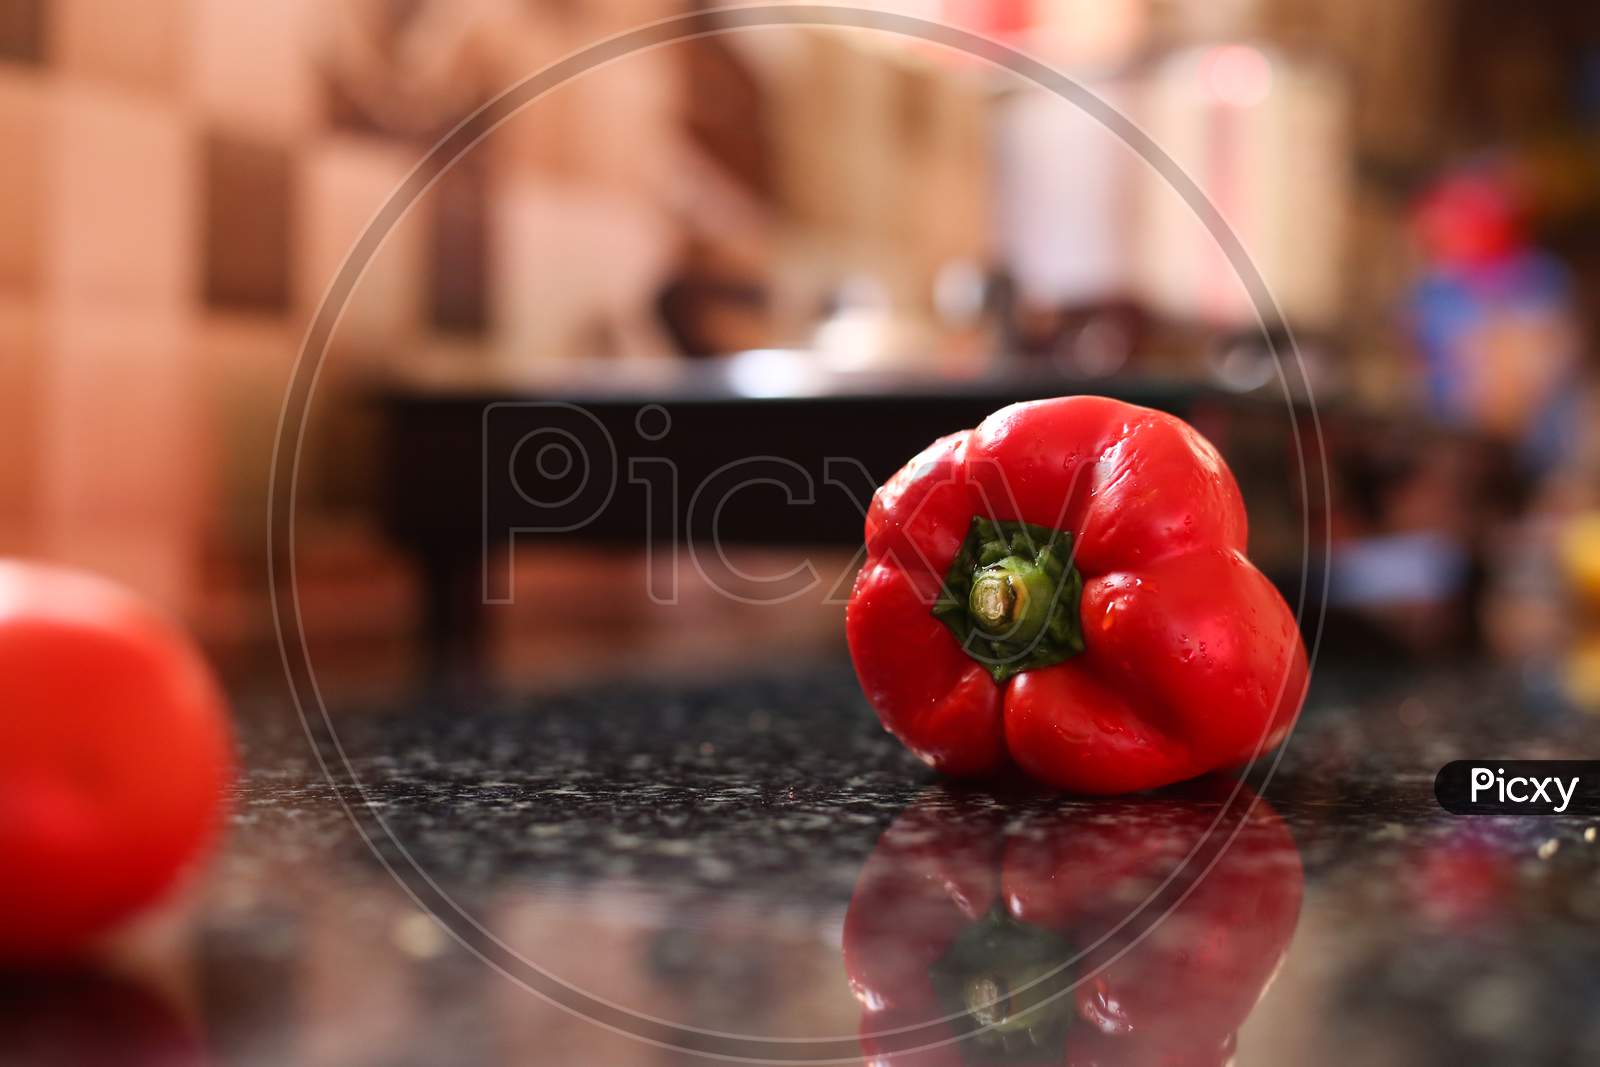 Red Bell Pepper In The Kitchen